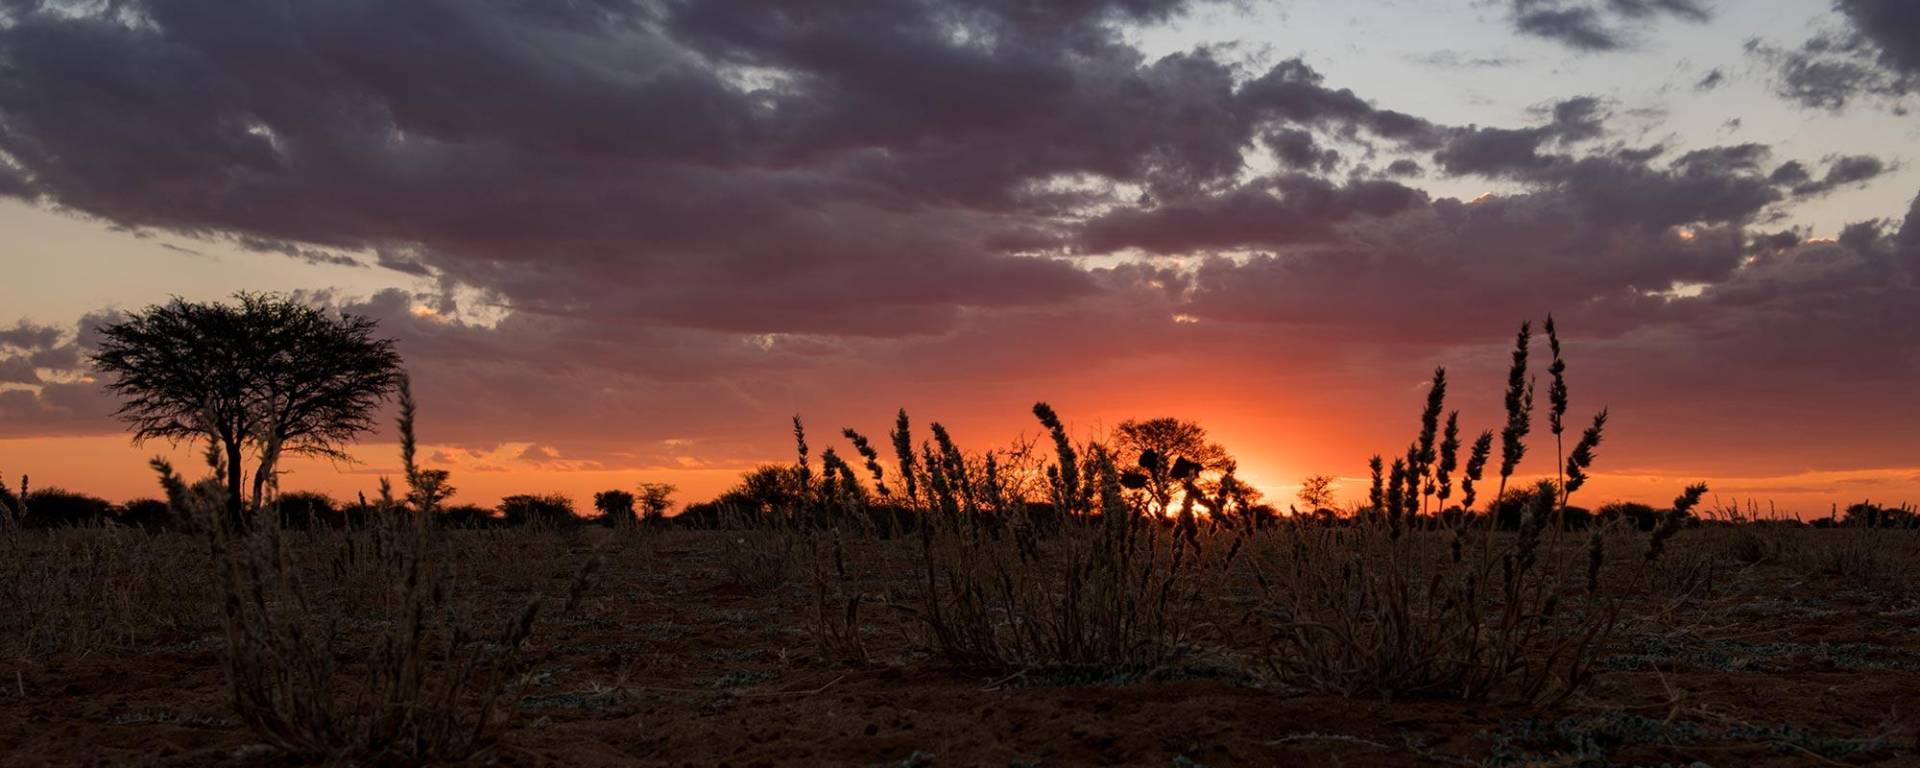 Sunset - always a special thing in Namibia